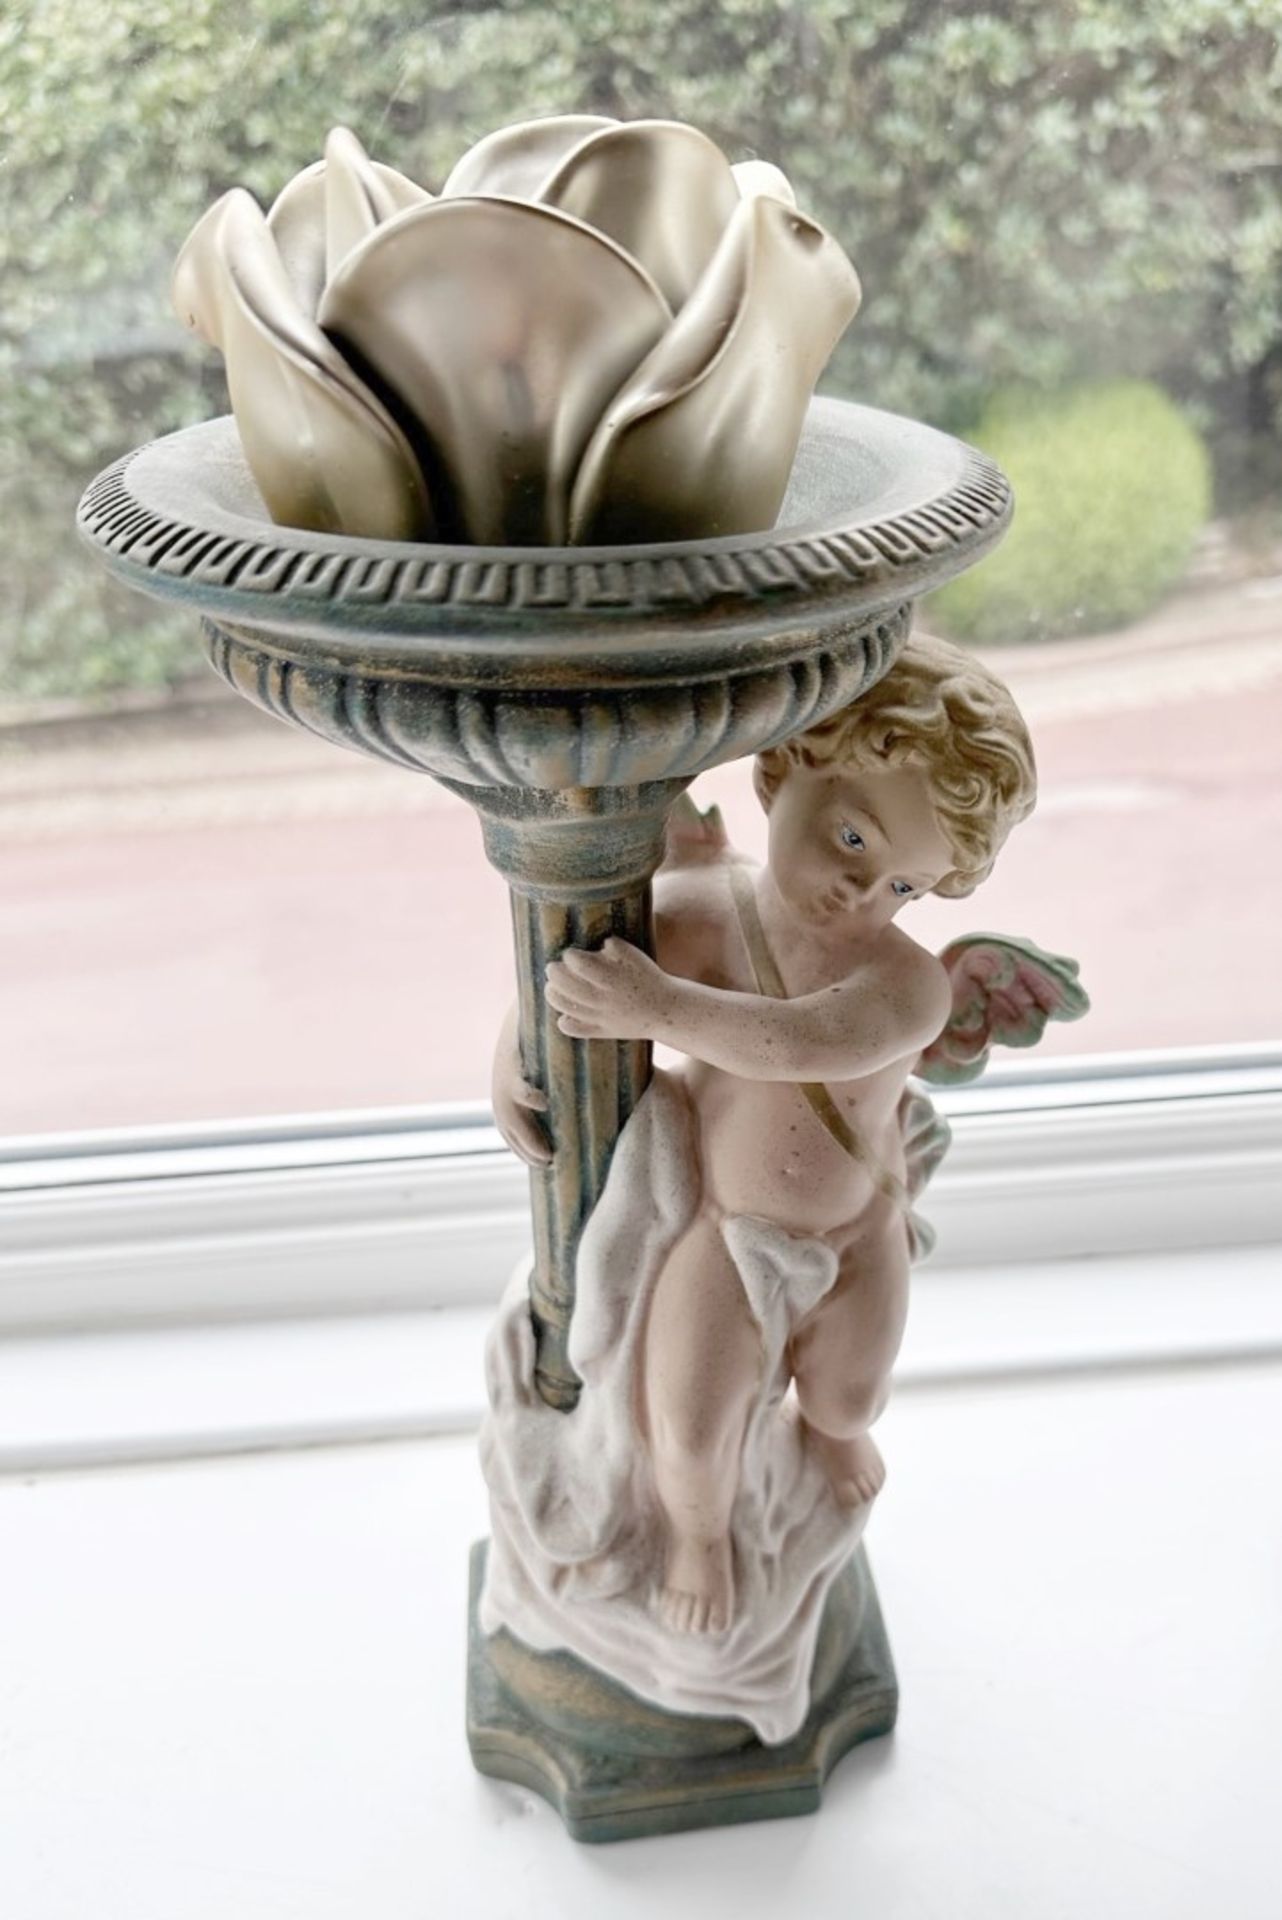 2 x Vintage French Porcelain Cherub Candle Holders